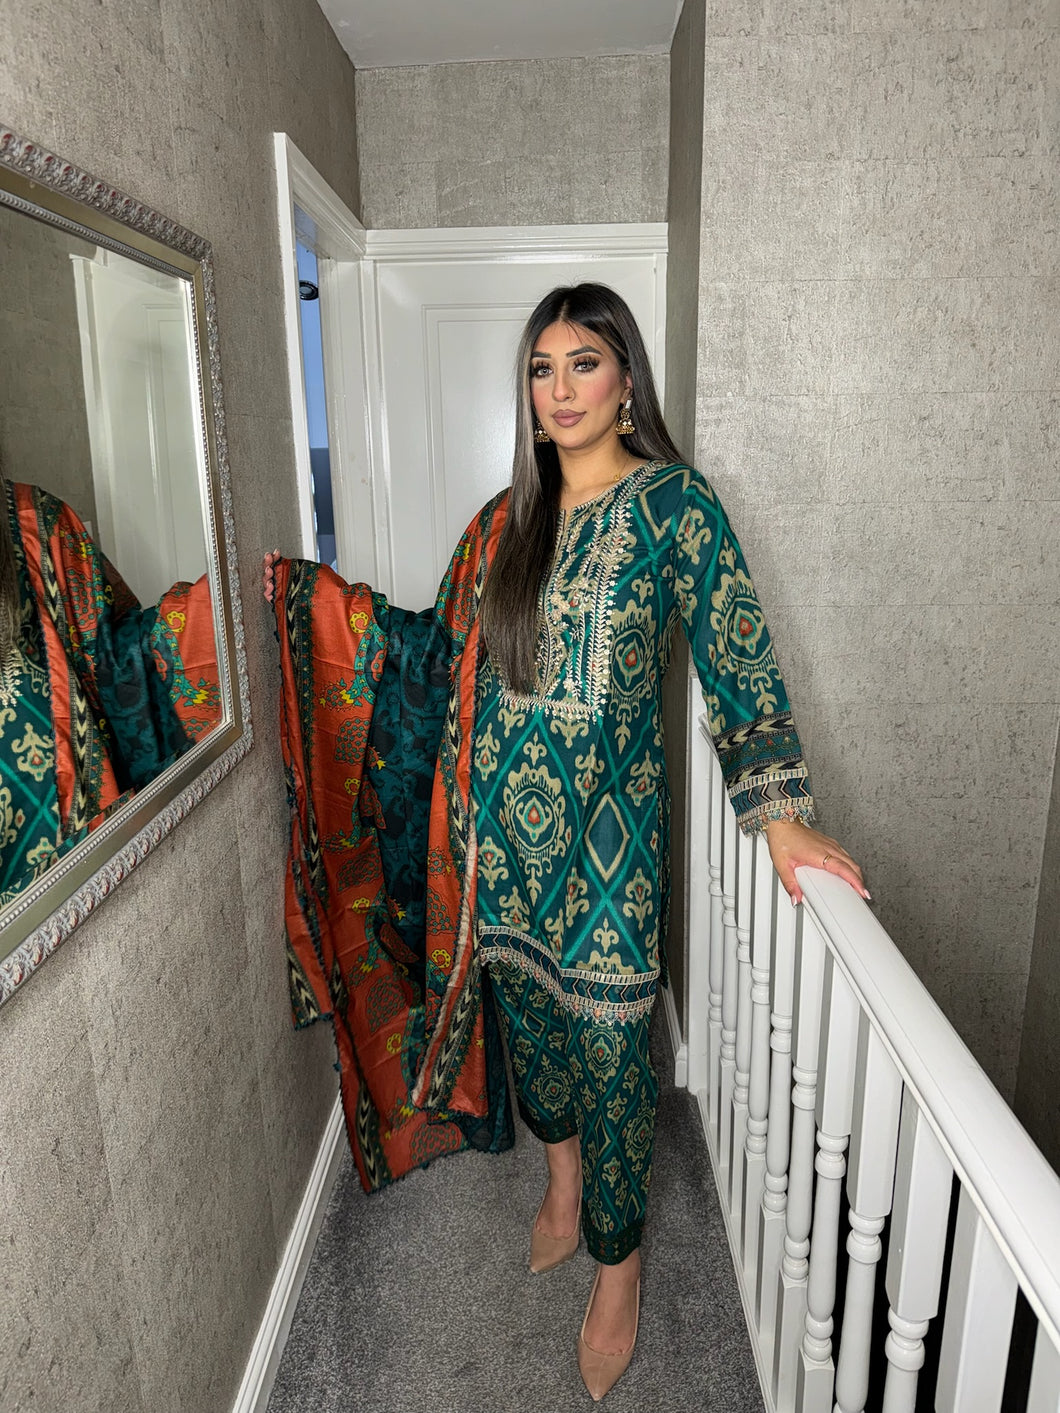 3PC Stitched TEAL Green shalwar Suit Ready to wear DHANAK winter Wear with Dhanak dupatta MBD-008